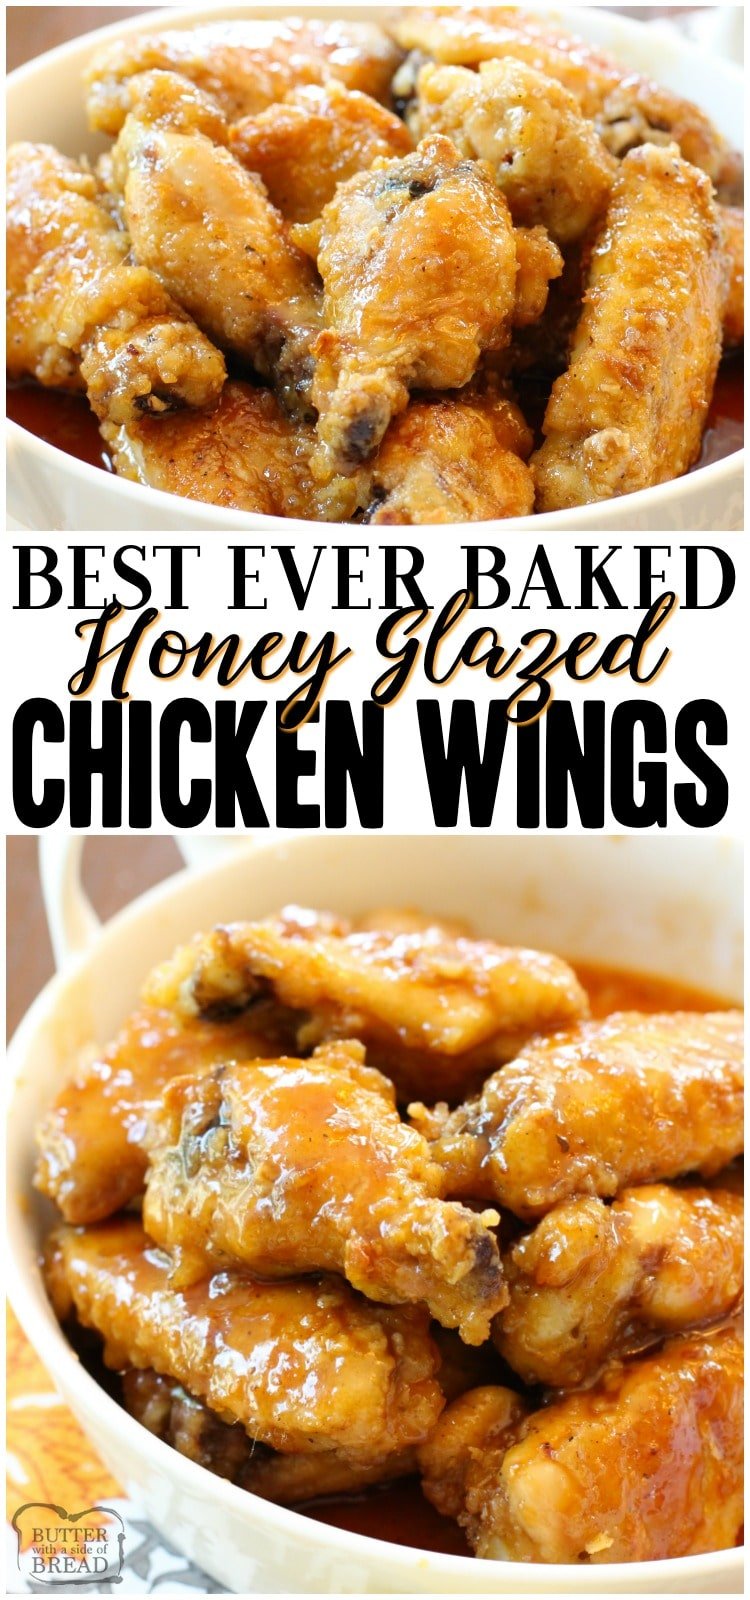 Honey Glazed Chicken Wings are baked, then smothered with a delicious sweet honey glaze. Simple baked chicken wings recipe are literally finger-lickin’ good! #chicken #wings #baked #honey #recipe #appetizer from BUTTER WITH A SIDE OF BREAD